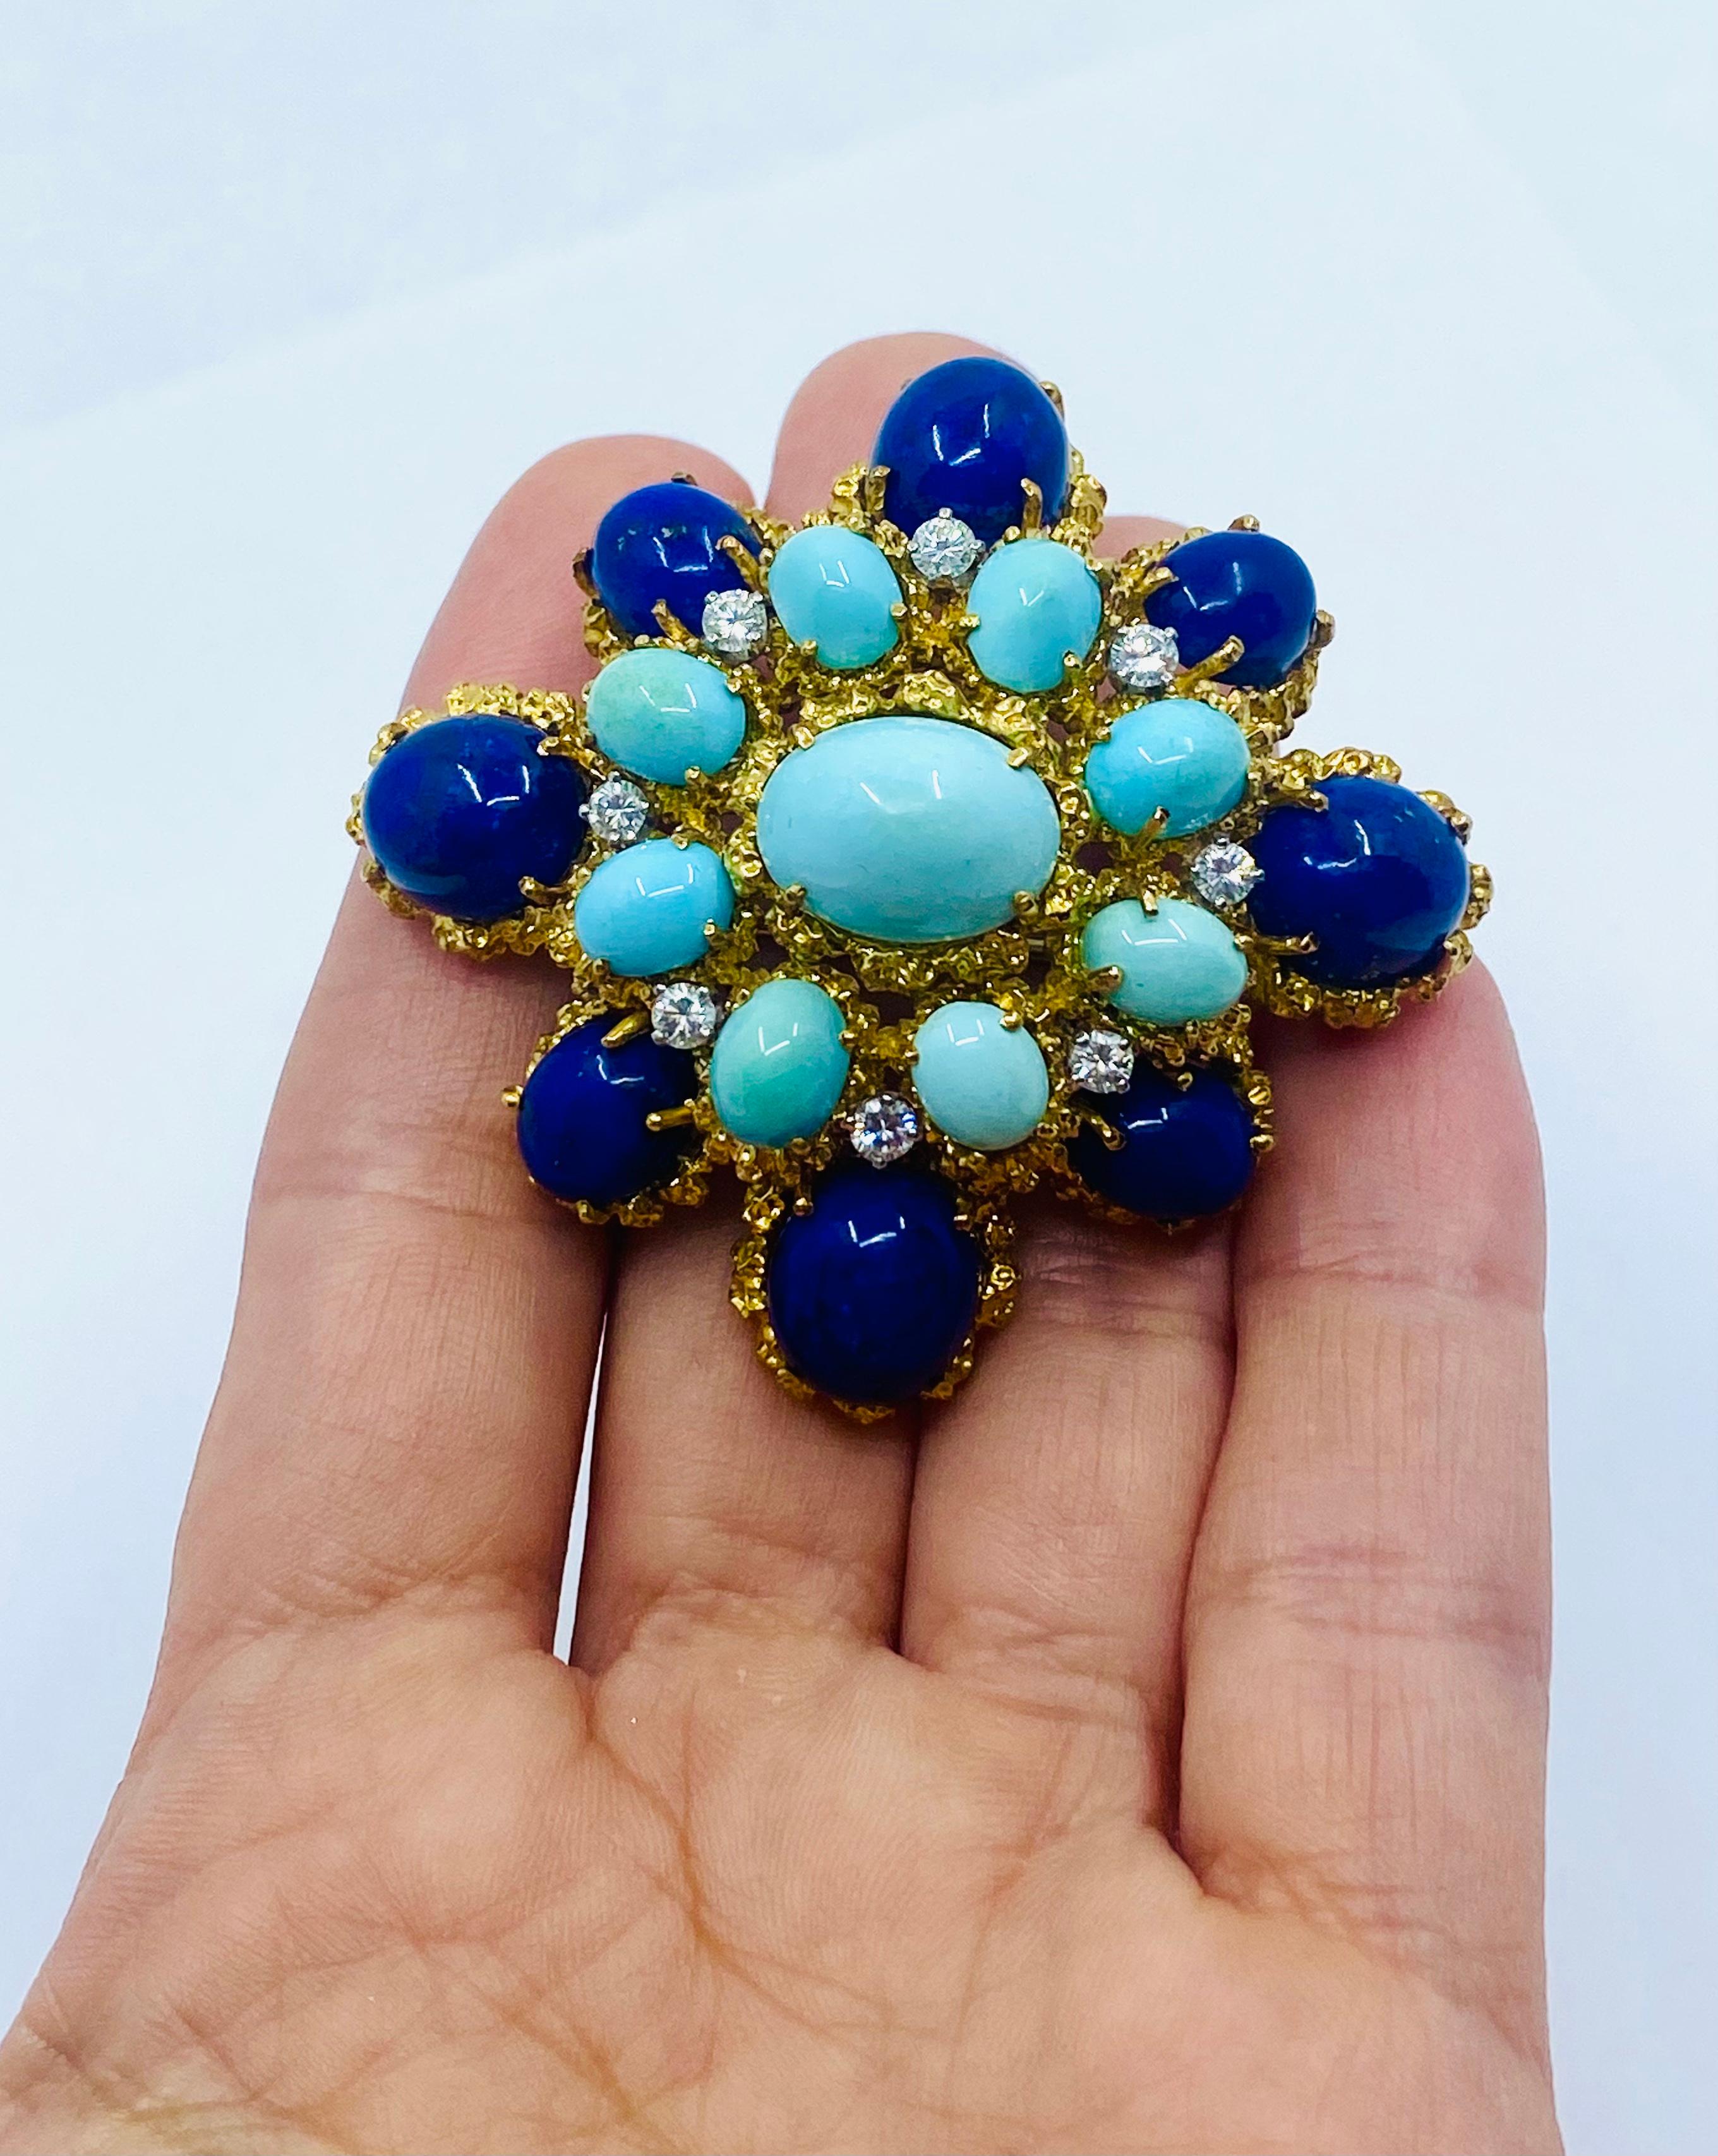 DESIGNER: Tiffany & Co.
CIRCA: 1970’s
MATERIALS: 18k Yellow Gold
GEMSTONE: Lapis Lazuli  and Turquoise
GEMSTONE 2: 1 cts Round Brilliant Cut Diamond
WEIGHT: 45.1 grams
MEASUREMENTS: 2- 1/4” x 2”
HALLMARKS: Tiffany & Co. 

ITEM DETAILS:
A gorgeous